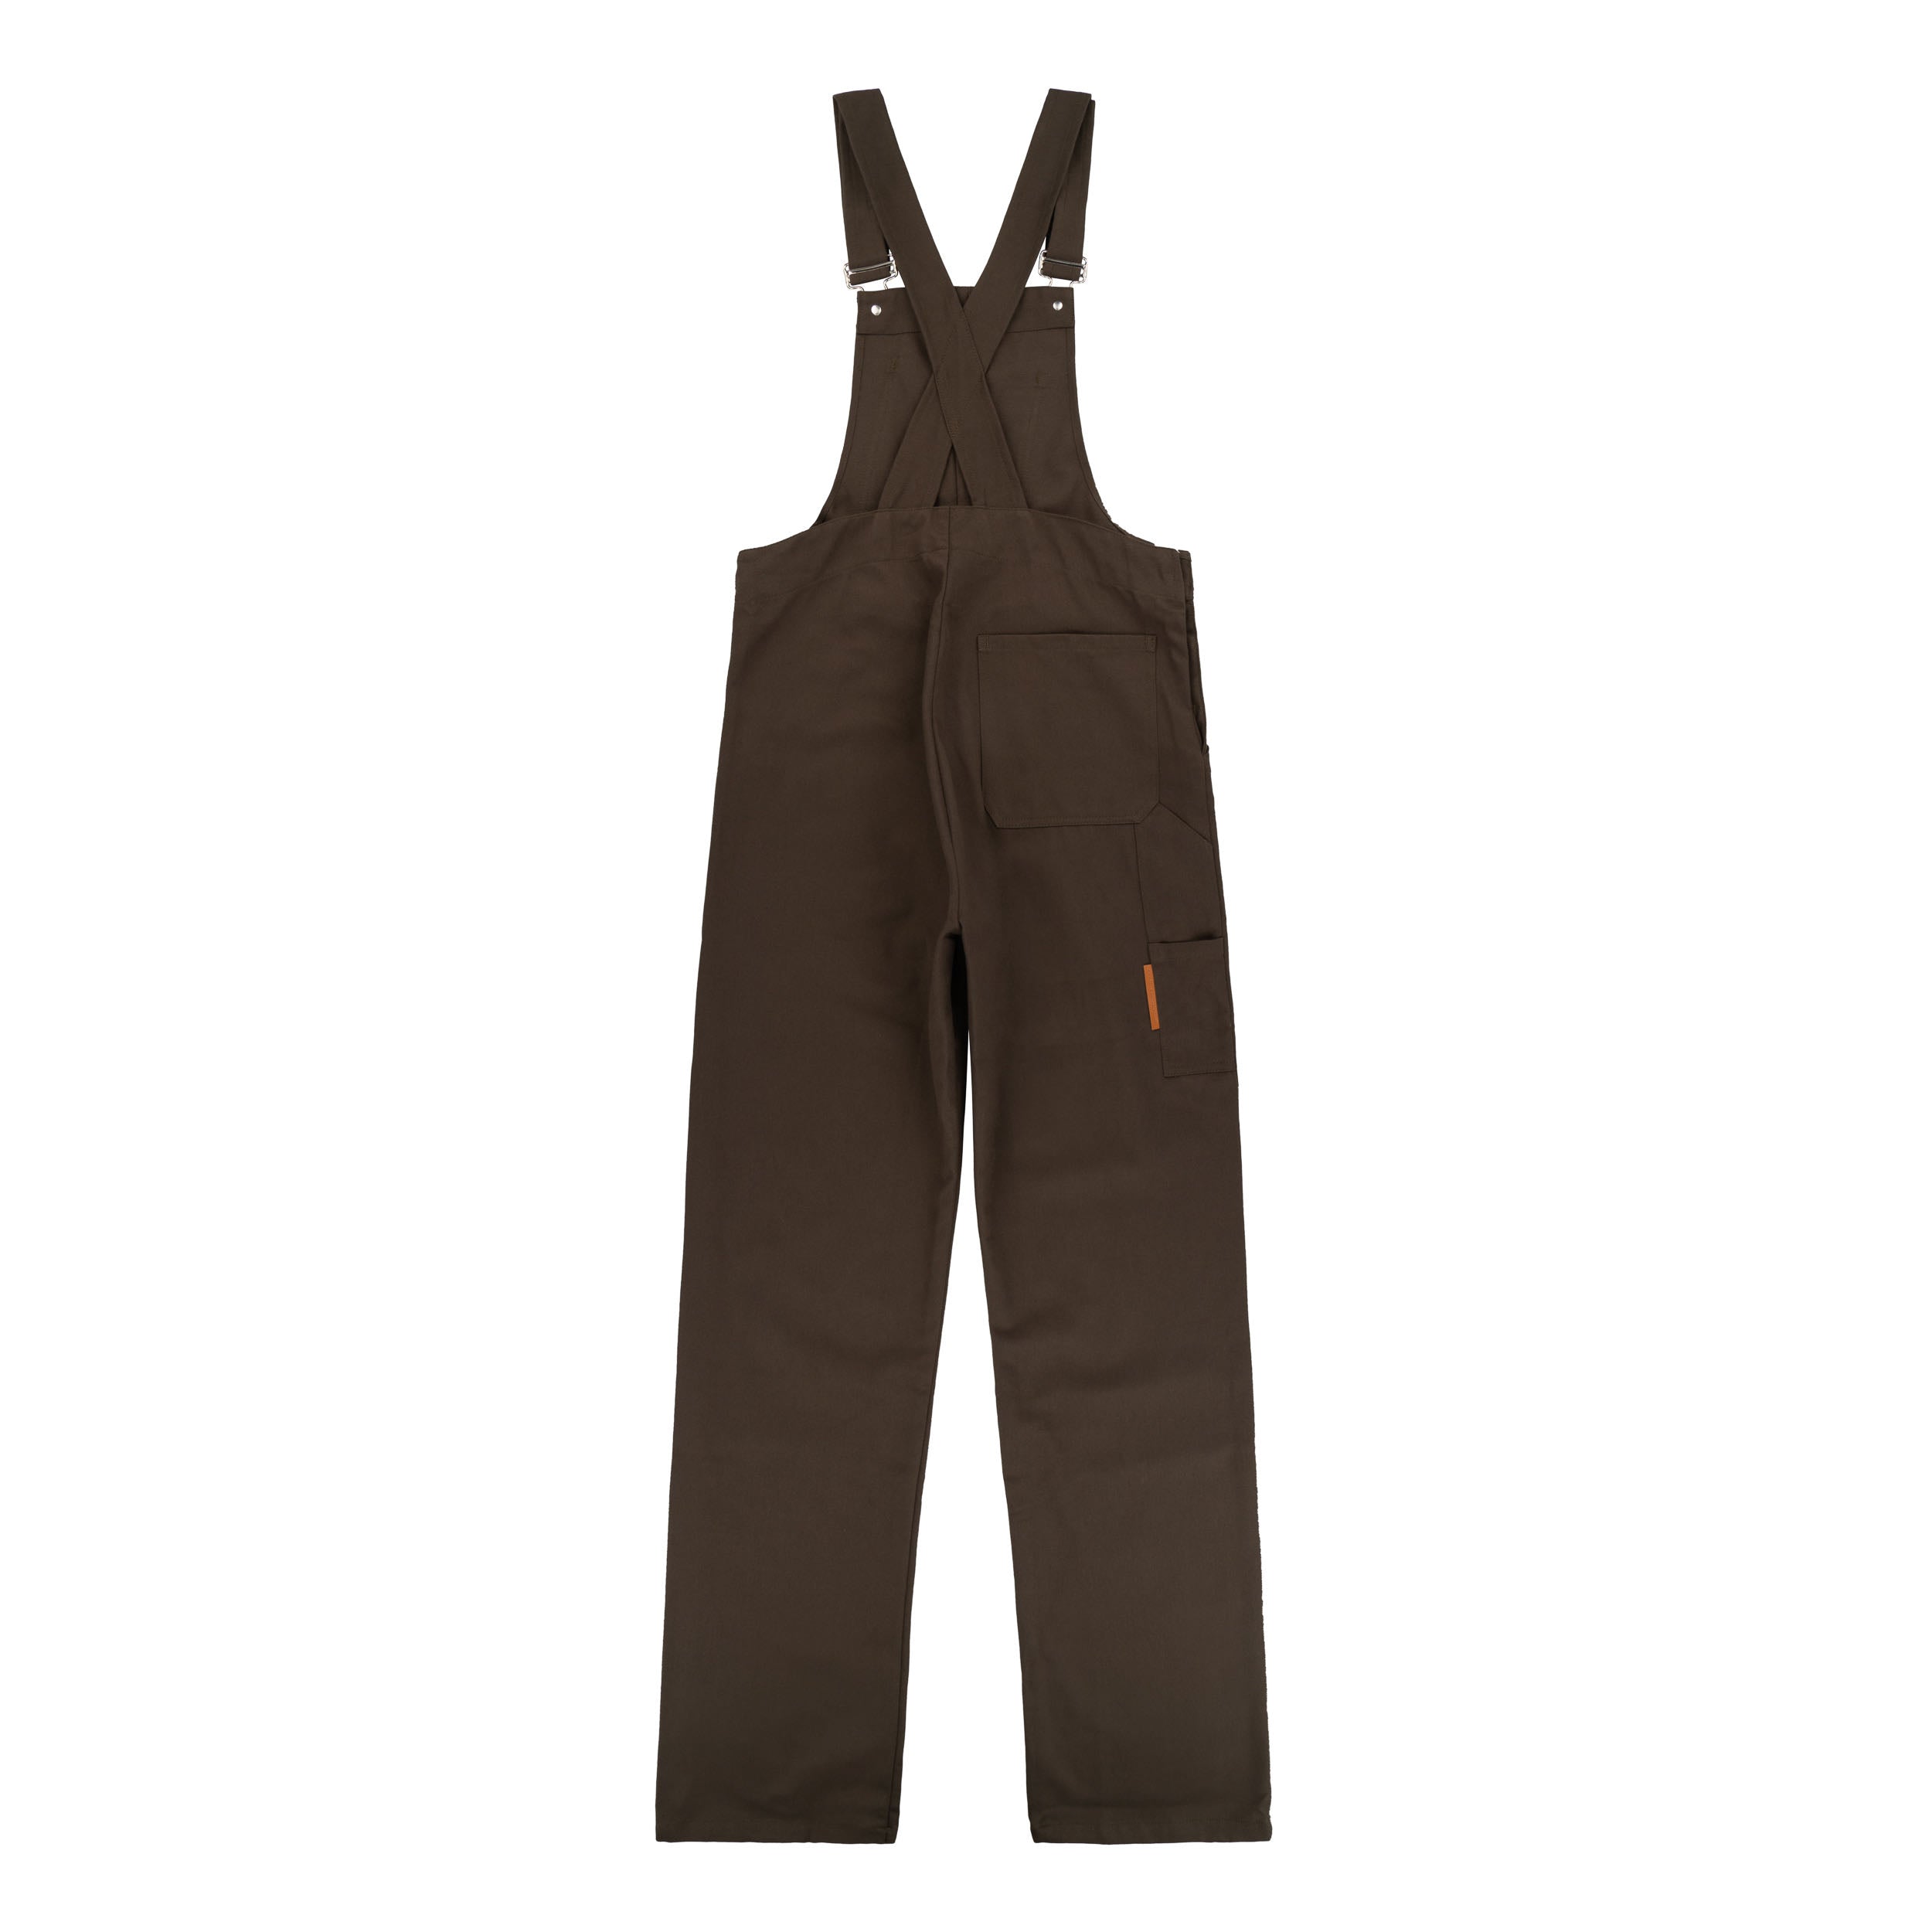 Carrier Company Men's full-length Dungarees in Olive